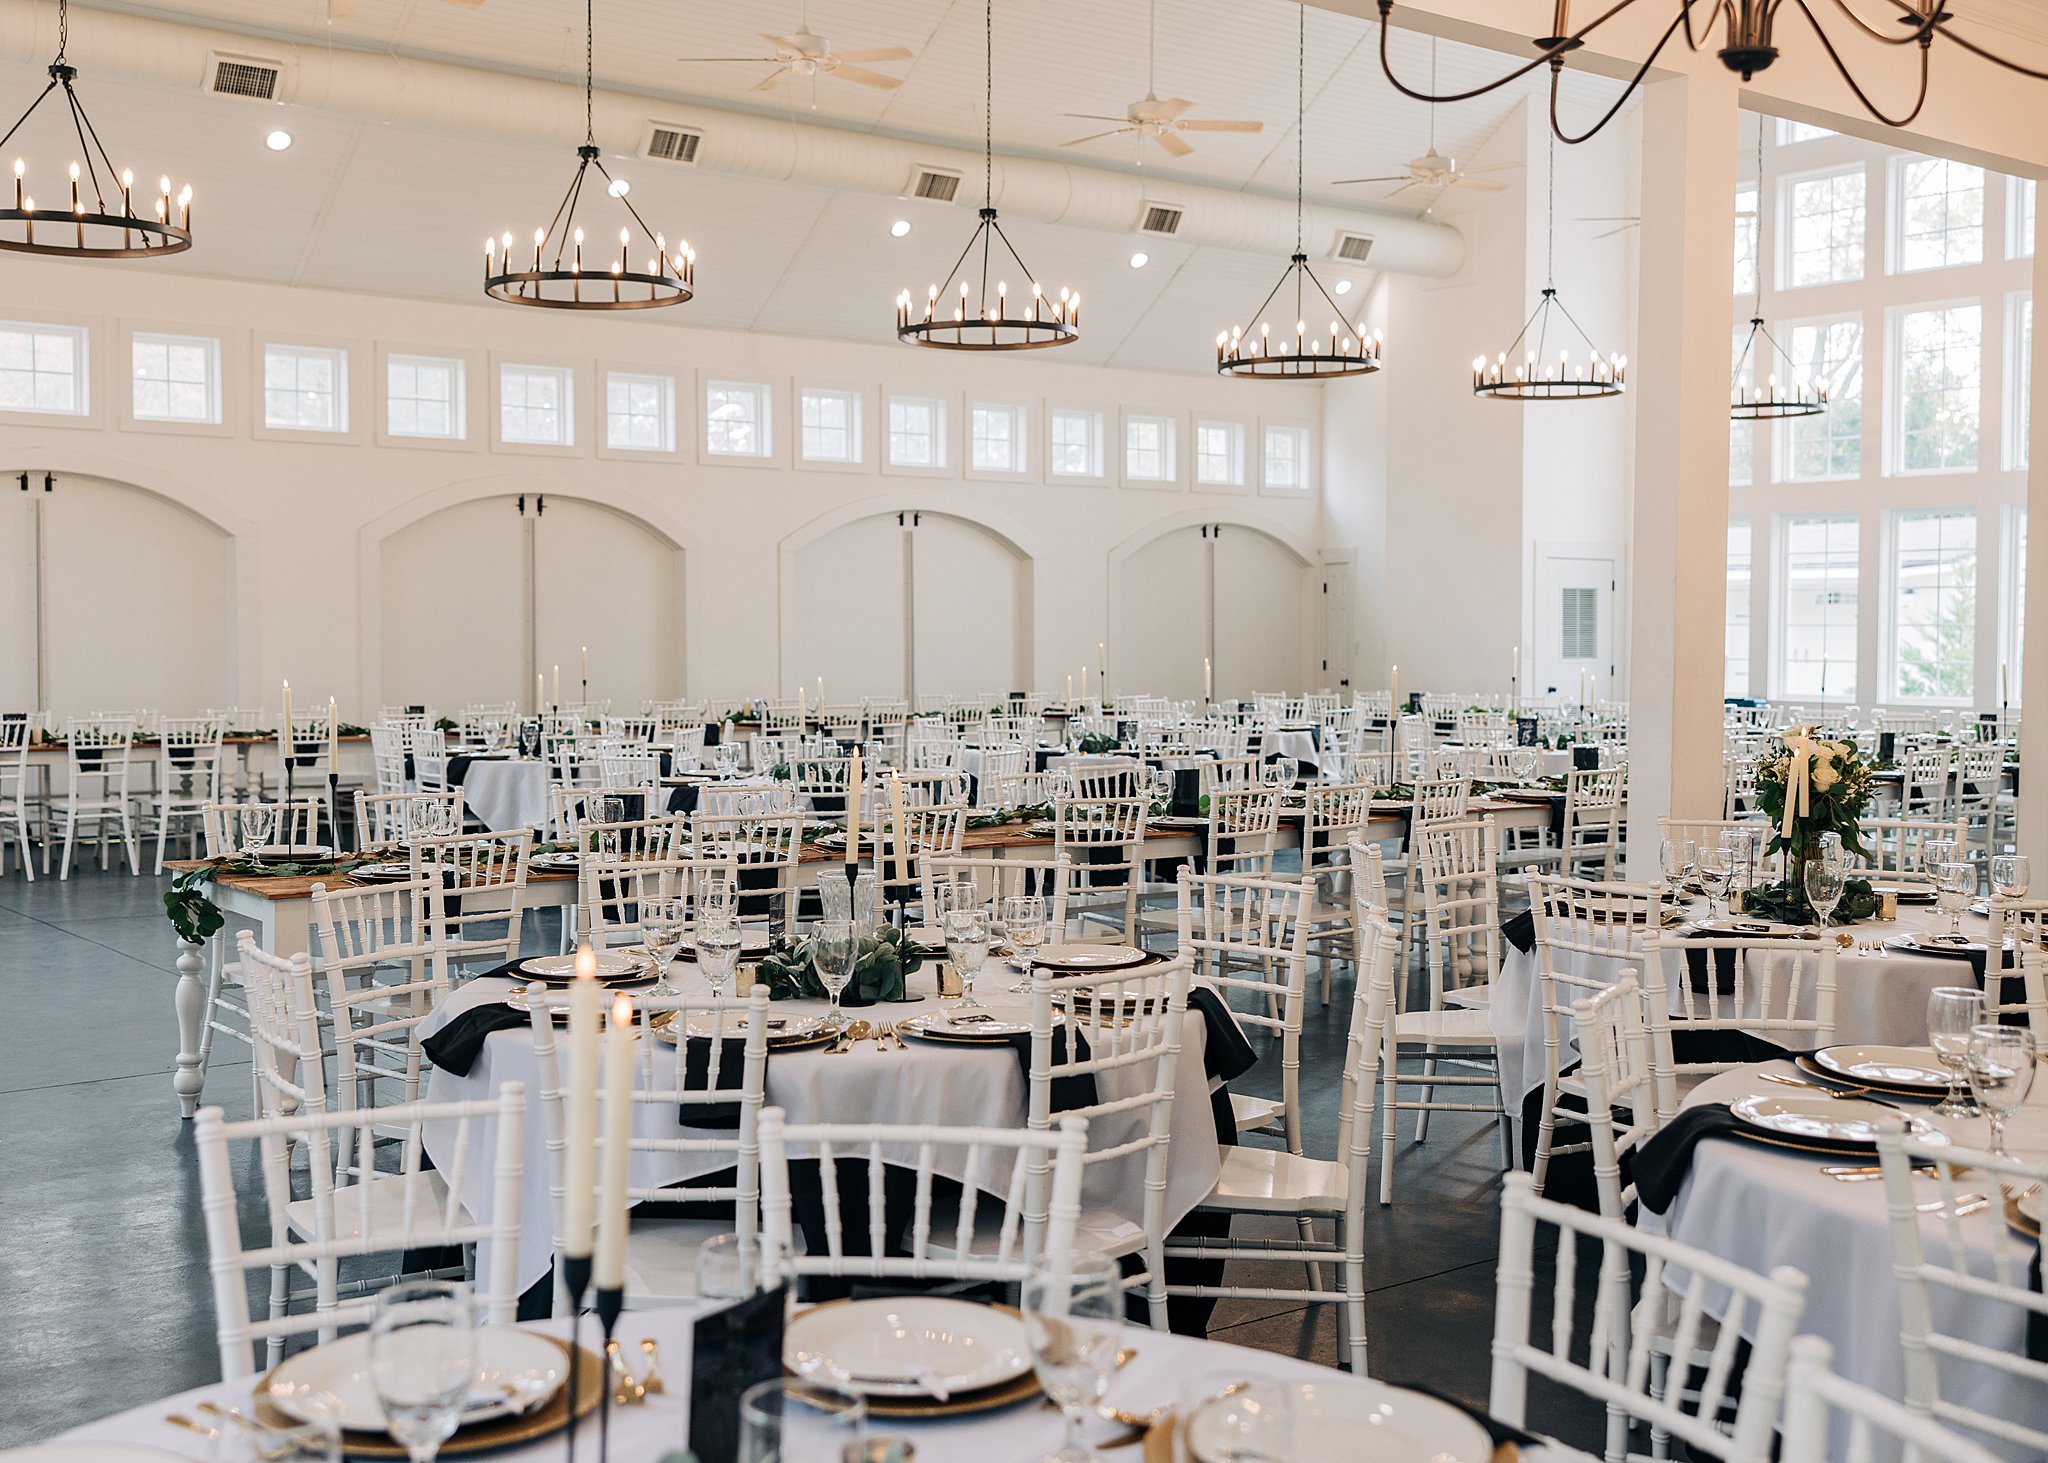 A view of a wedding reception set up with white chairs and linens